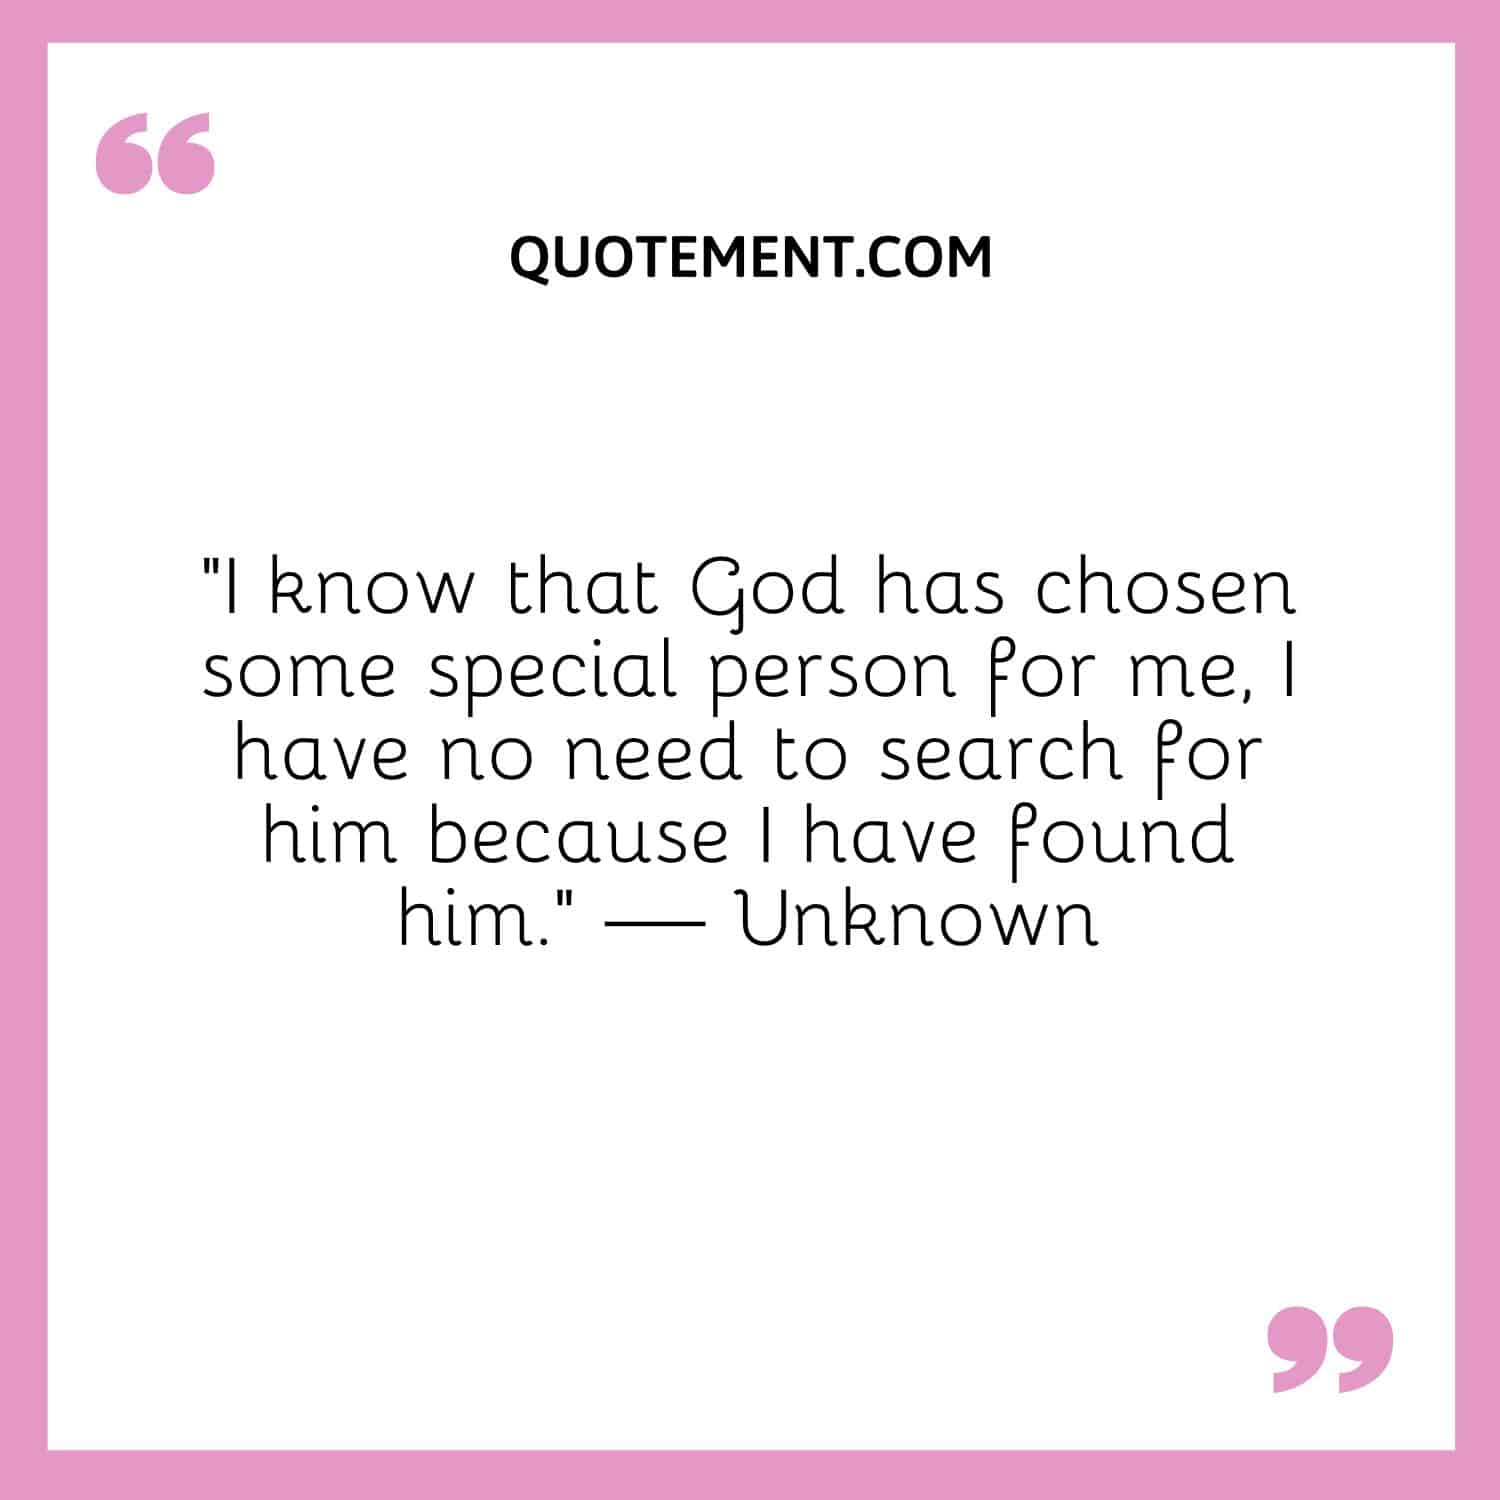 I know that God has chosen some special person for me, I have no need to search for him because I have found him